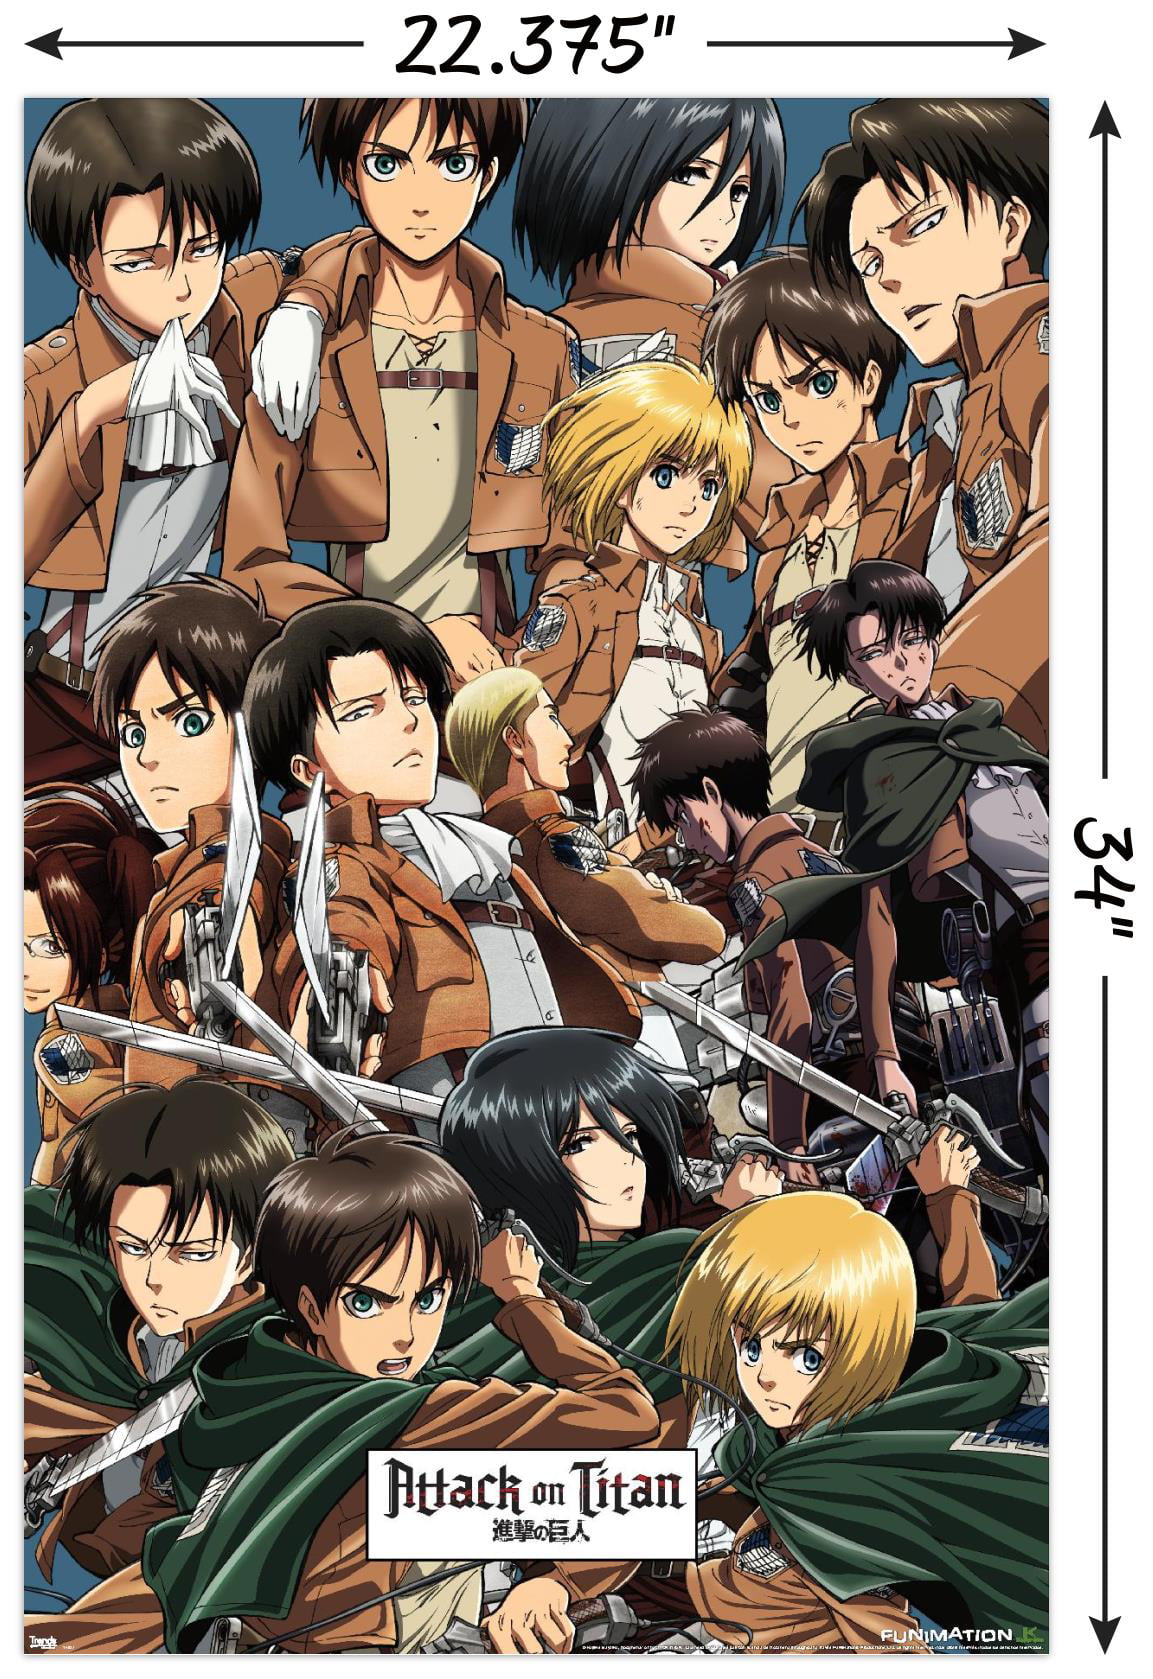 POSTER STOP ONLINE Attack on Titan Season 2 - TV Show Poster/Print  (Character Collage) (Size 24 x 36)